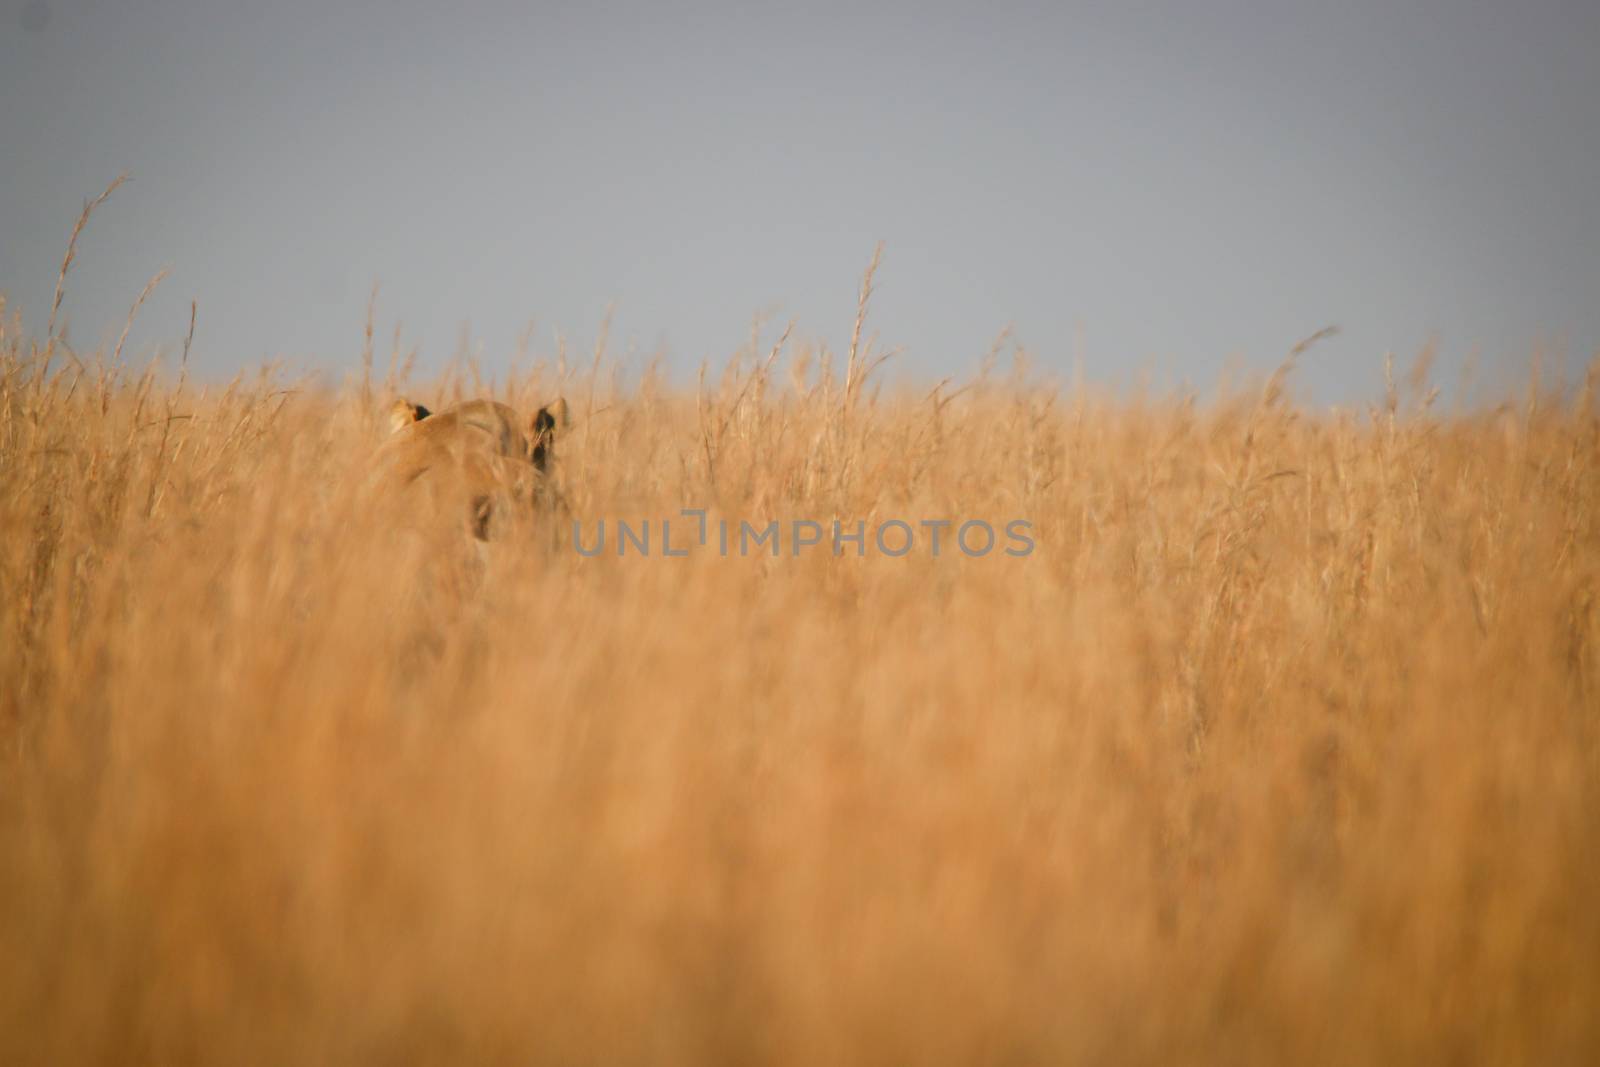 Lioness walking in the high grass. by Simoneemanphotography